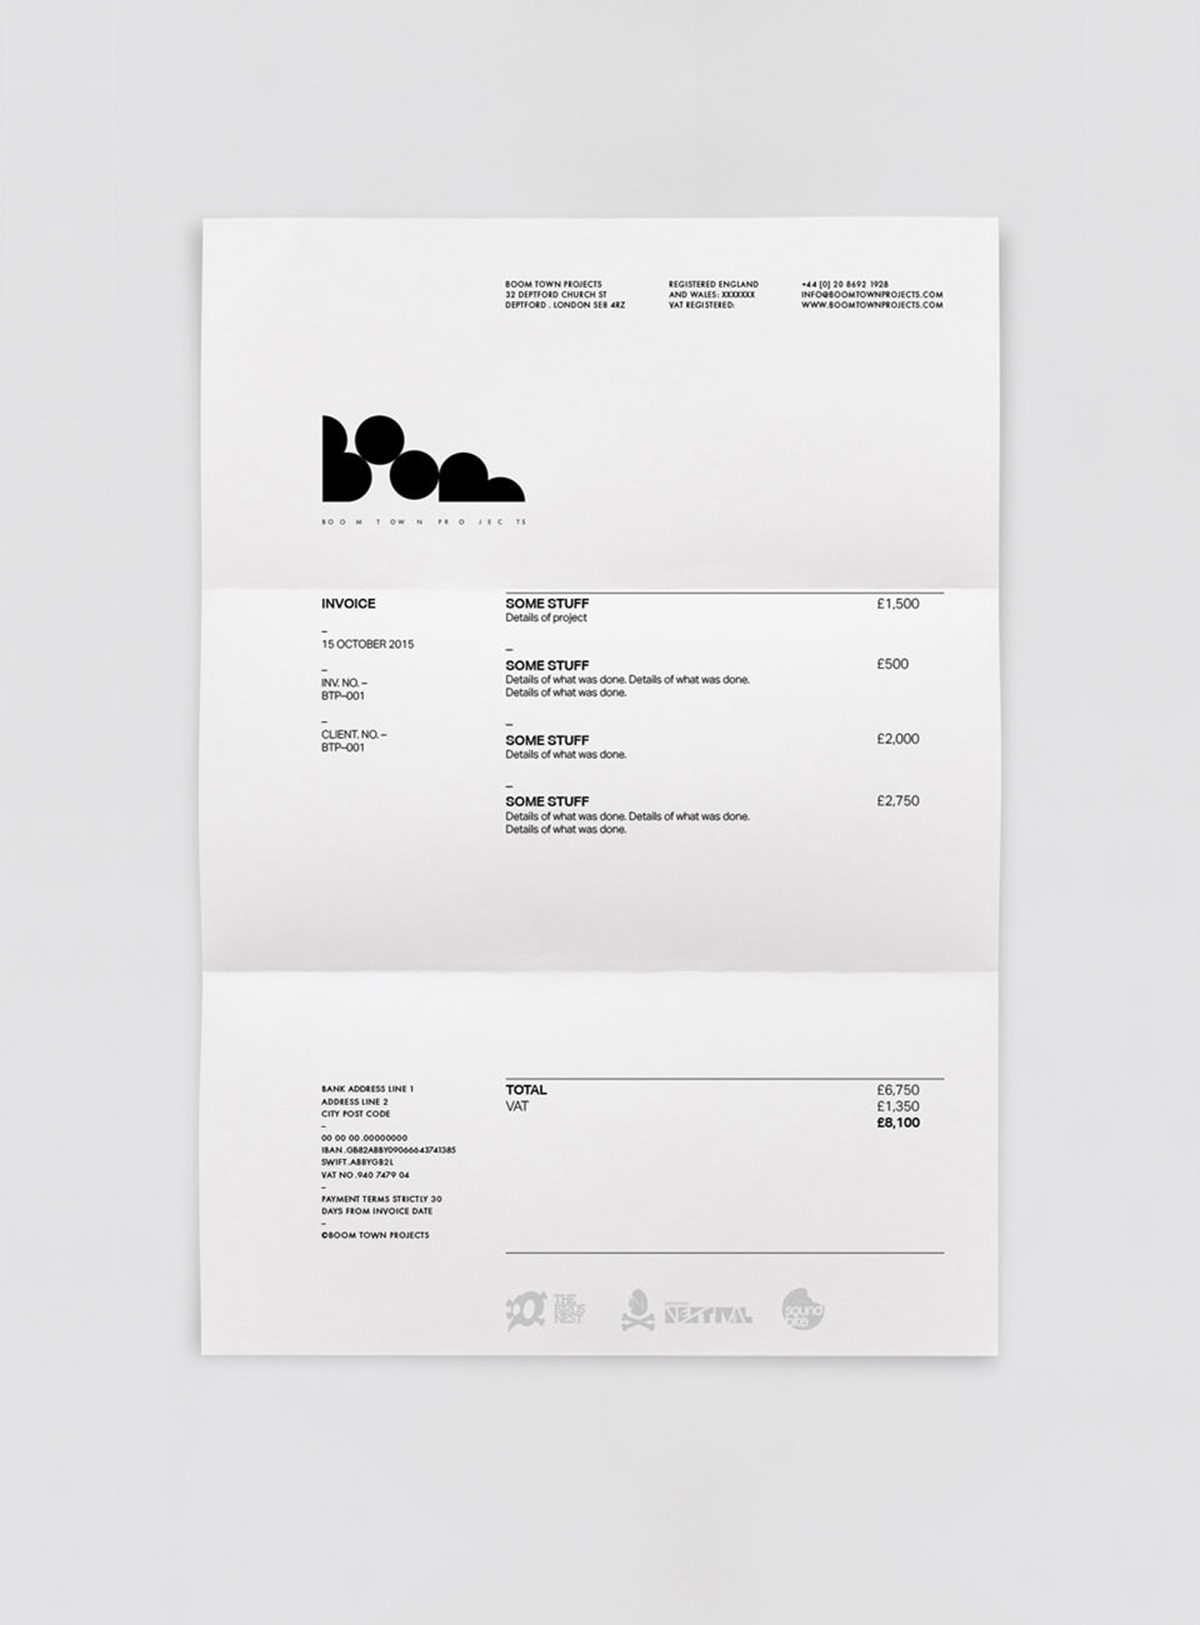 Boom Town Projects. Invoice mock up. Brand identity design by Superfried.